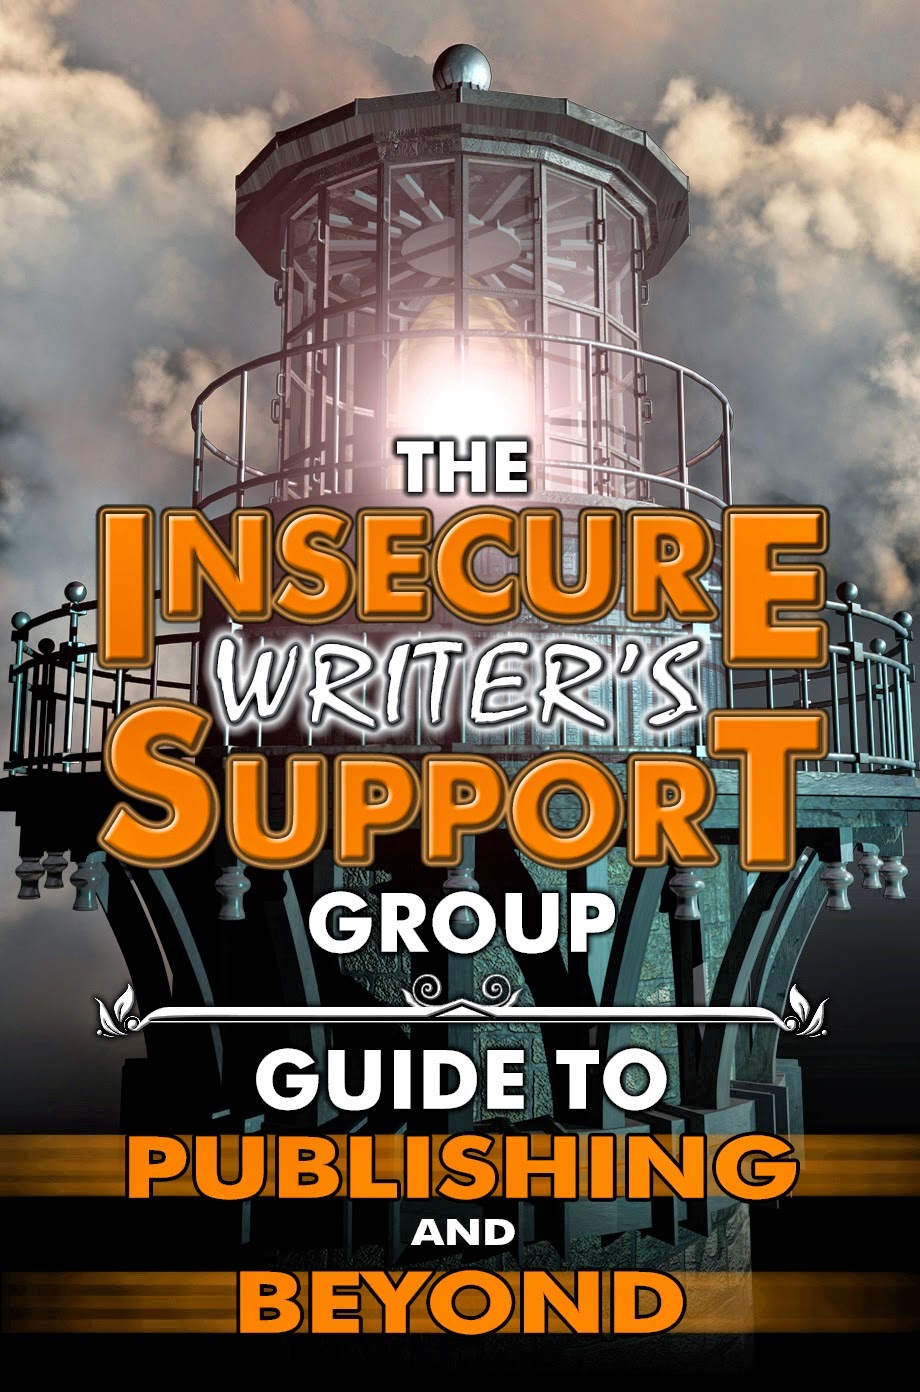 http://www.insecurewriterssupportgroup.com/2014/12/the-insecure-writers-support-group.html